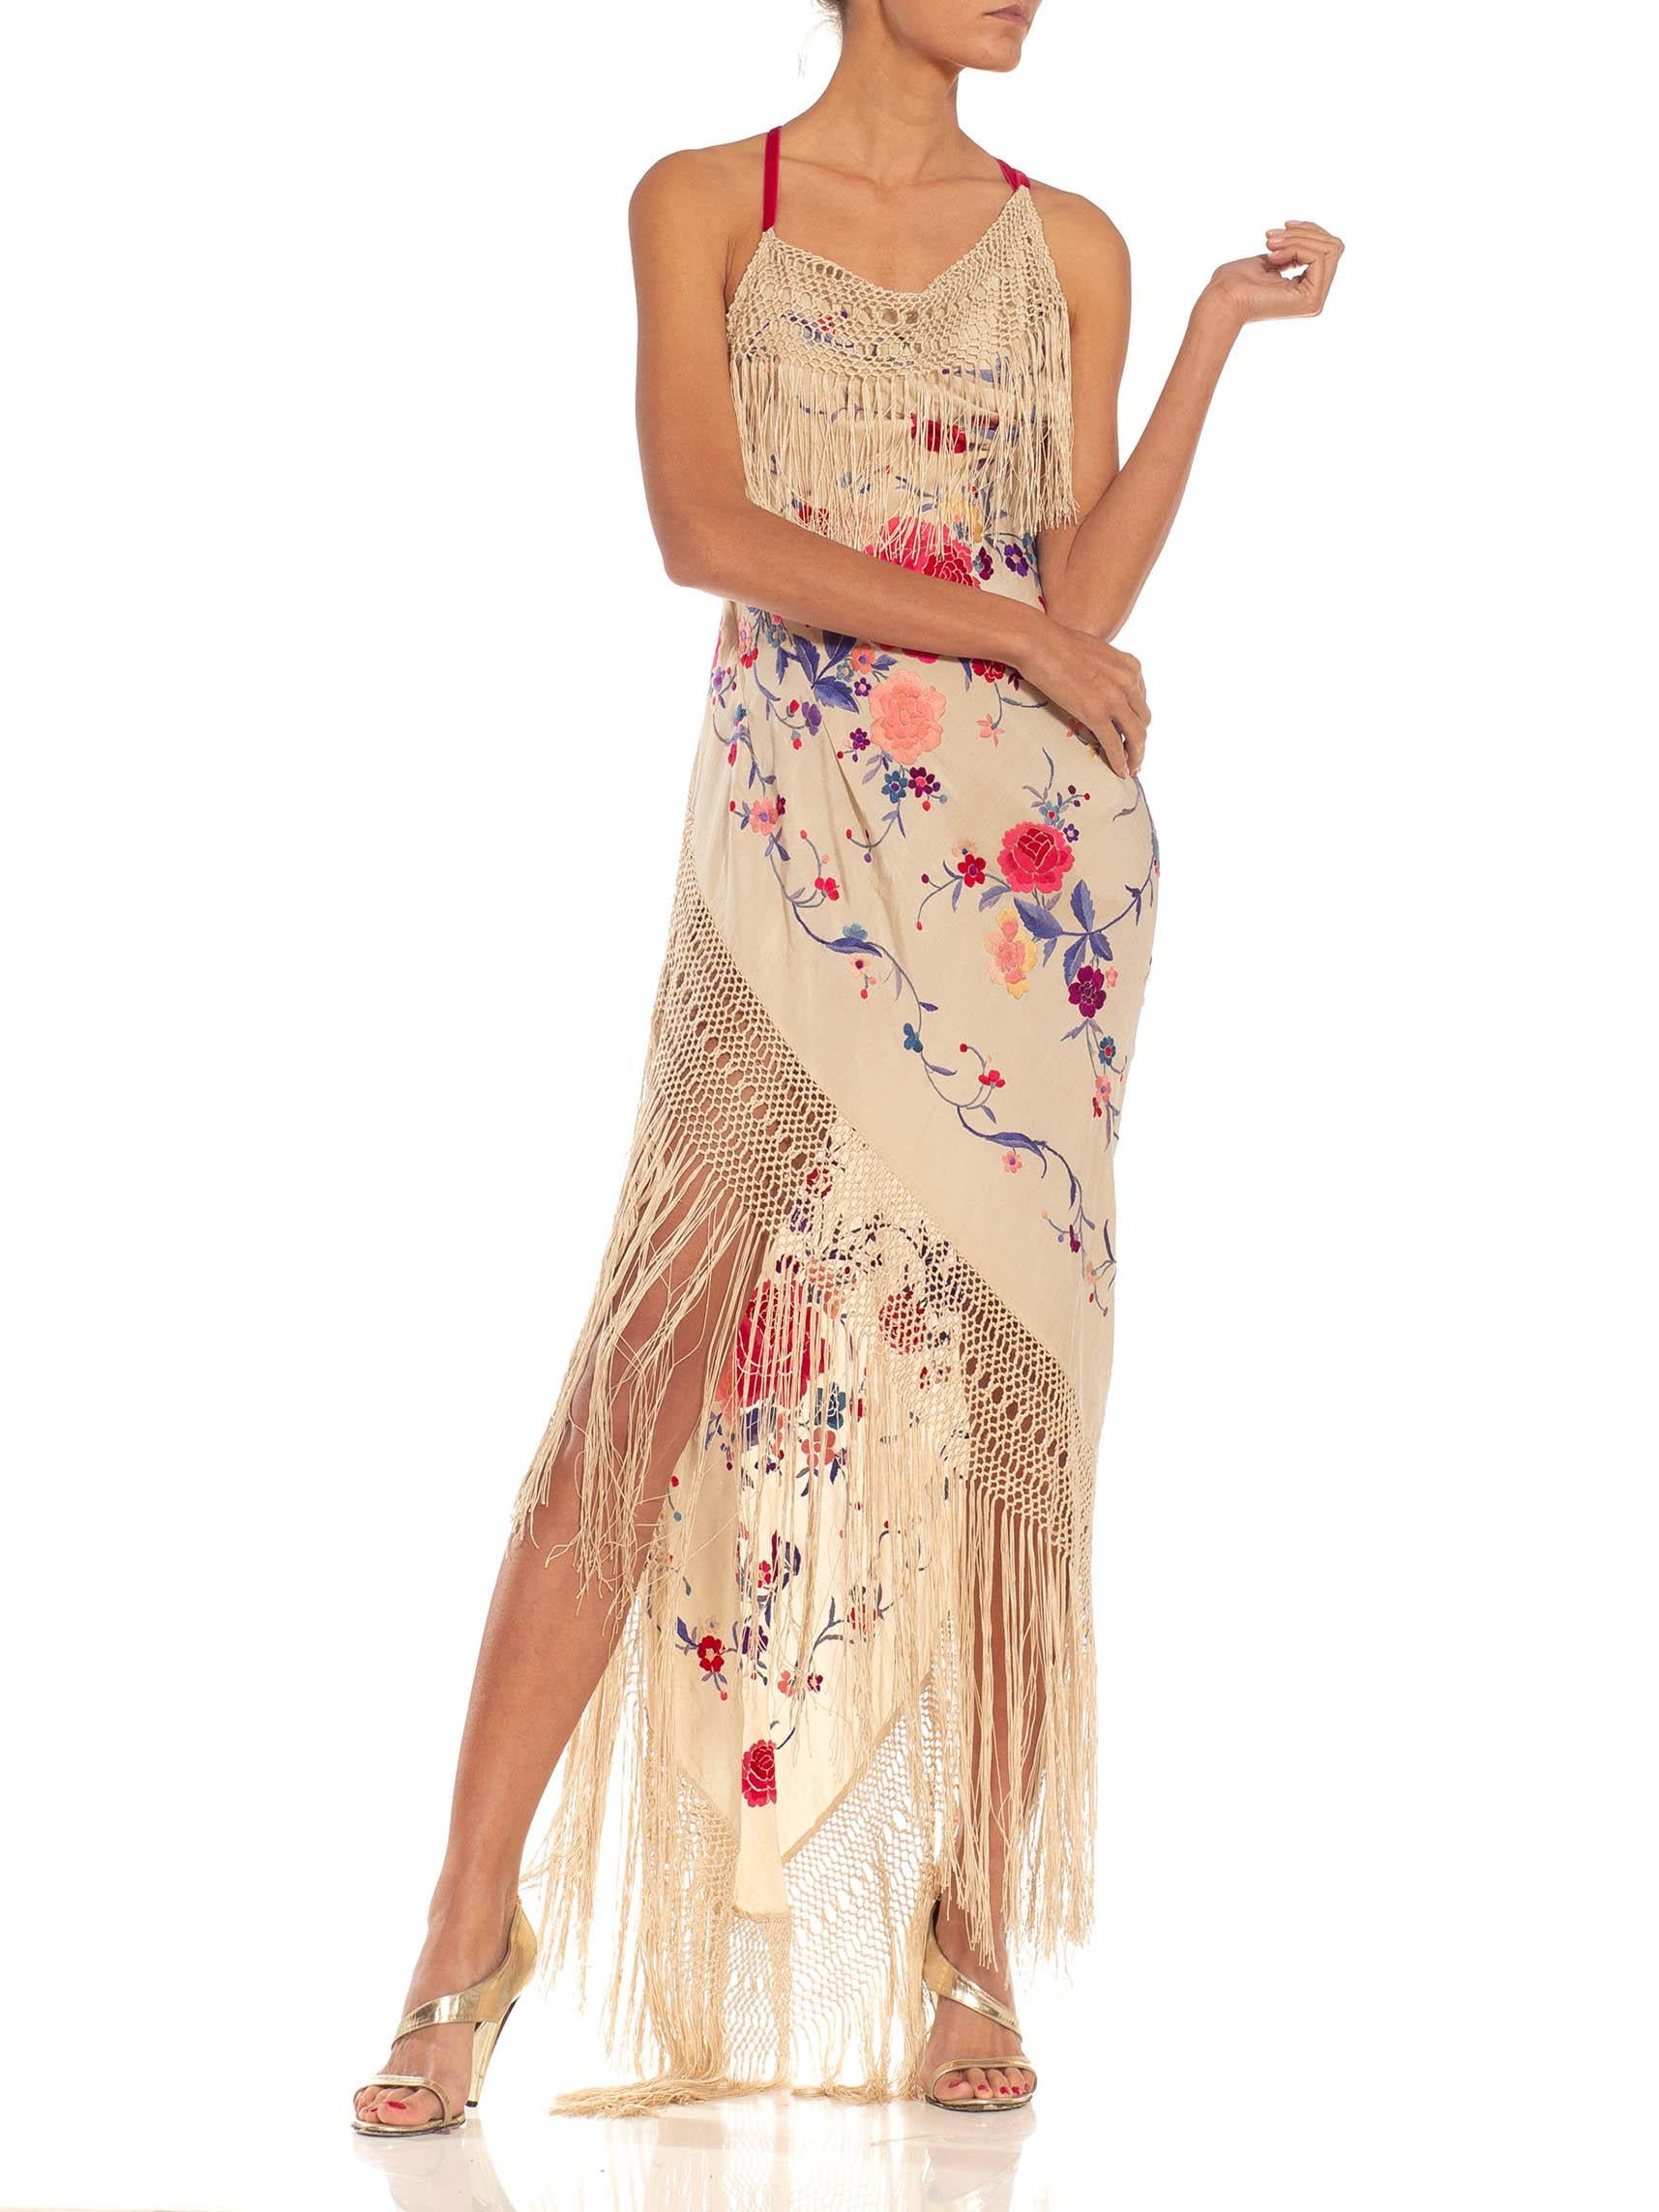 MORPHEW ATELIER Beige Bias Cut Fringed Dress Made From 1920S Hand-Embroidered S For Sale 2